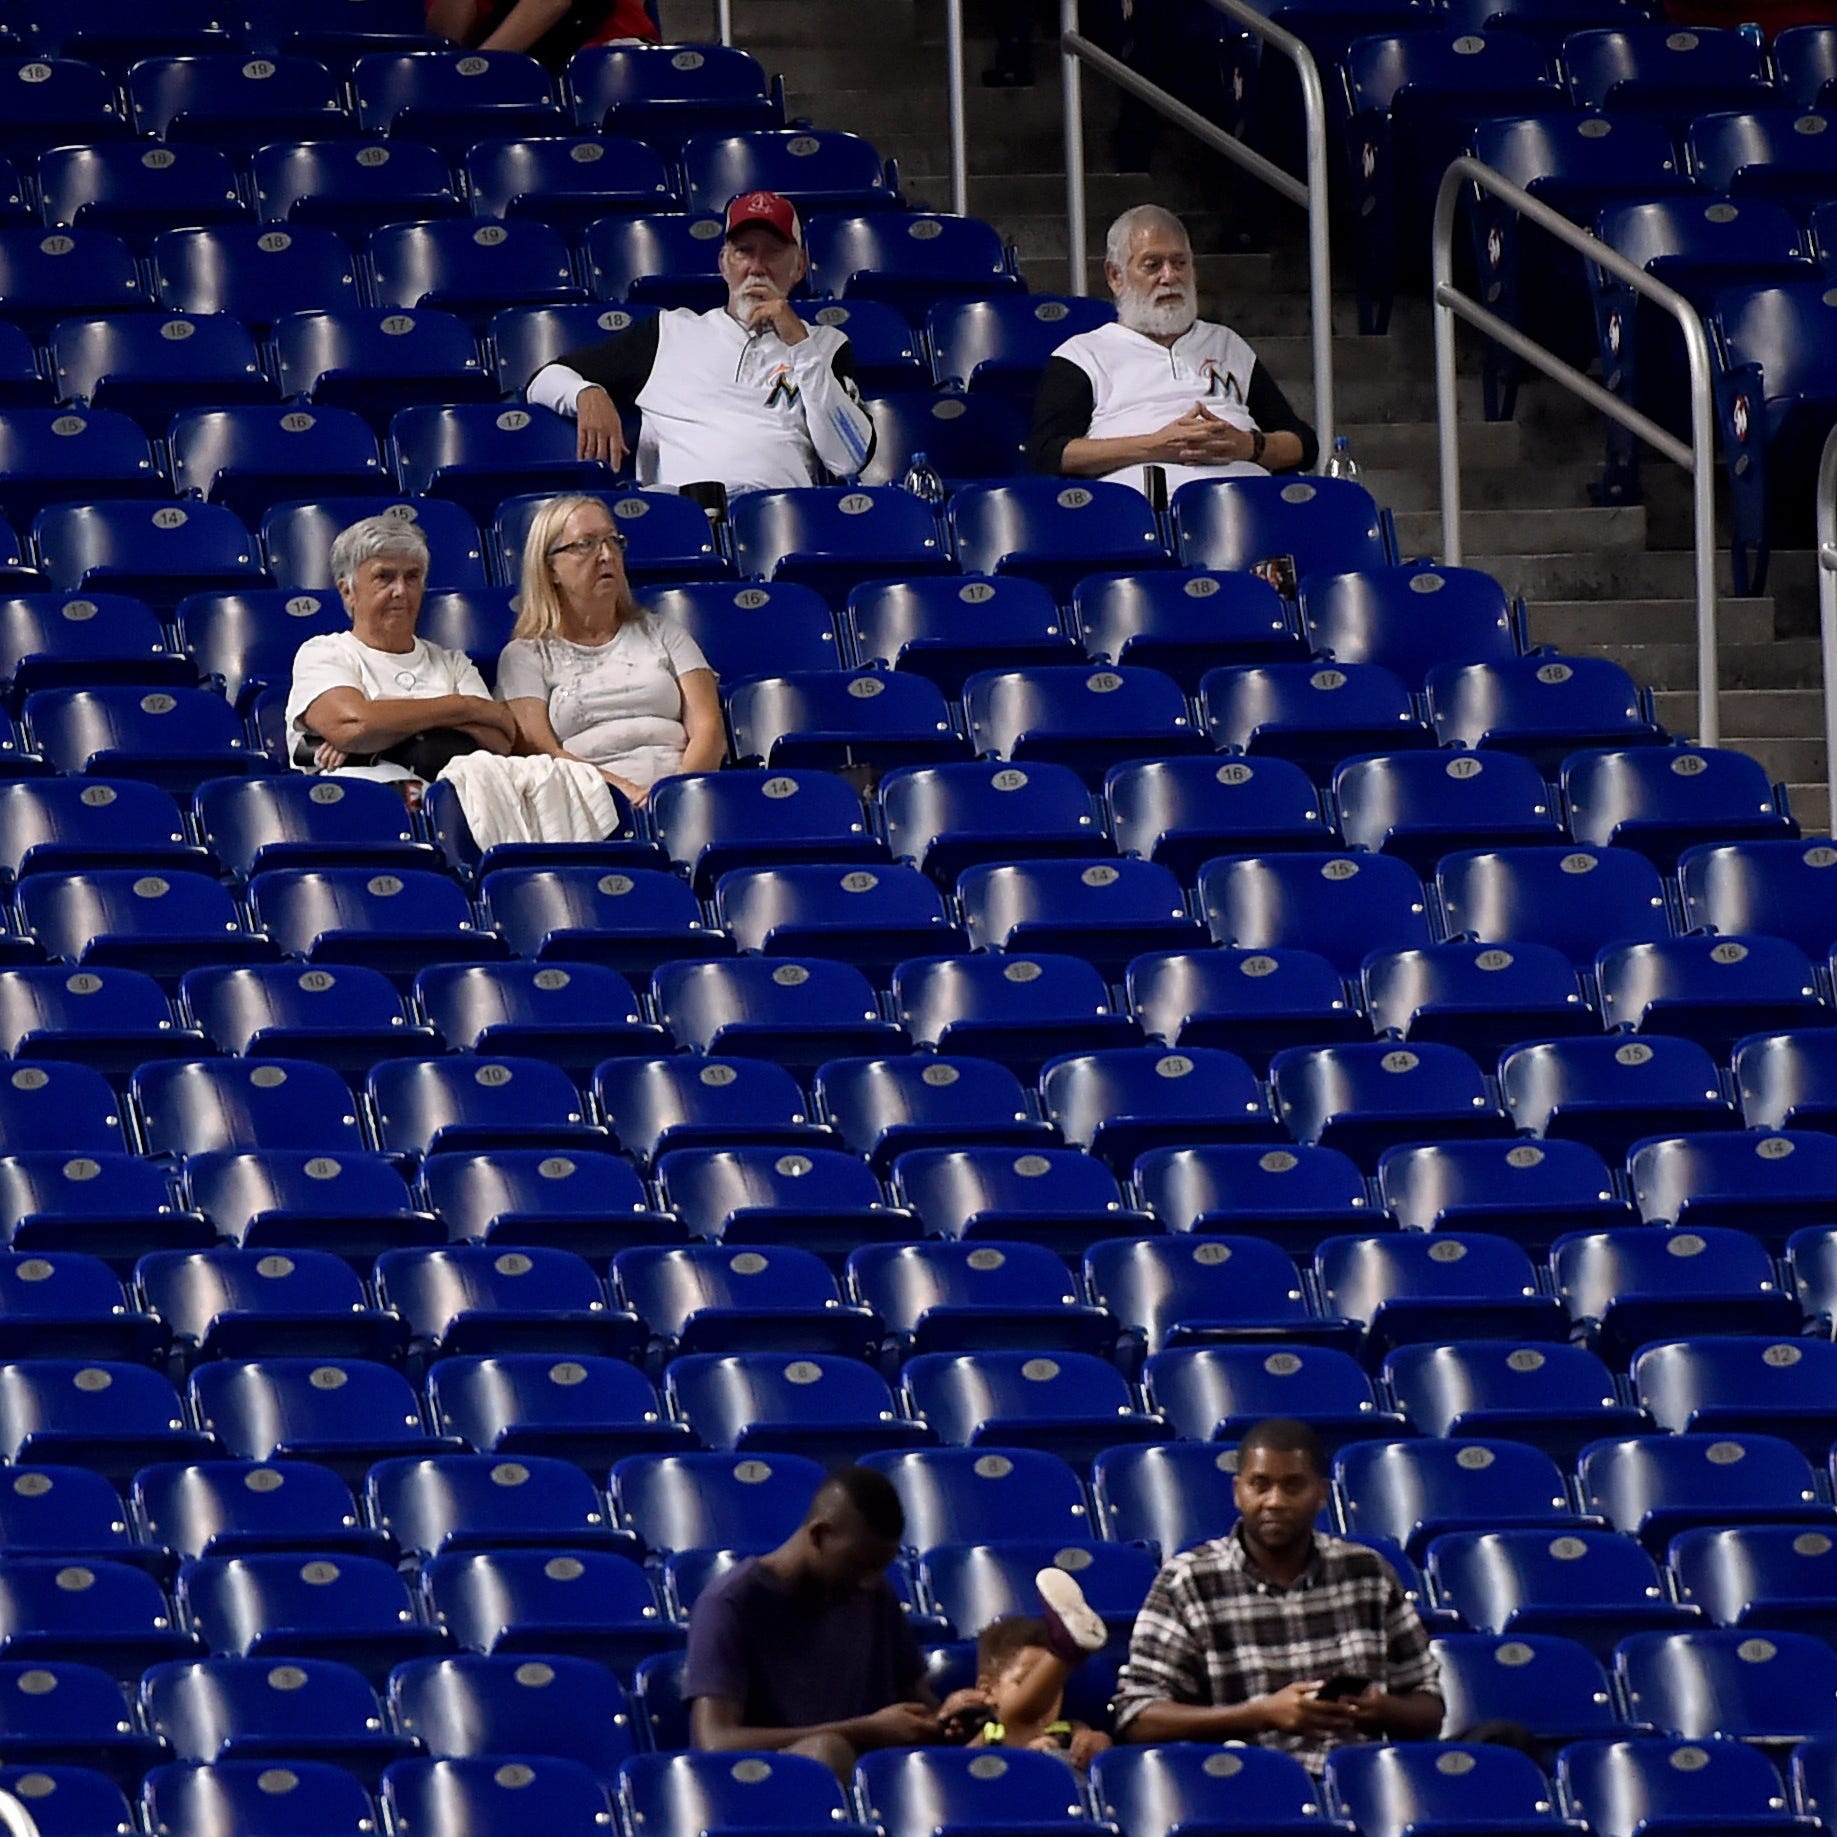 The average attendance of 10,088 Marlins Park ranks last in the majors.